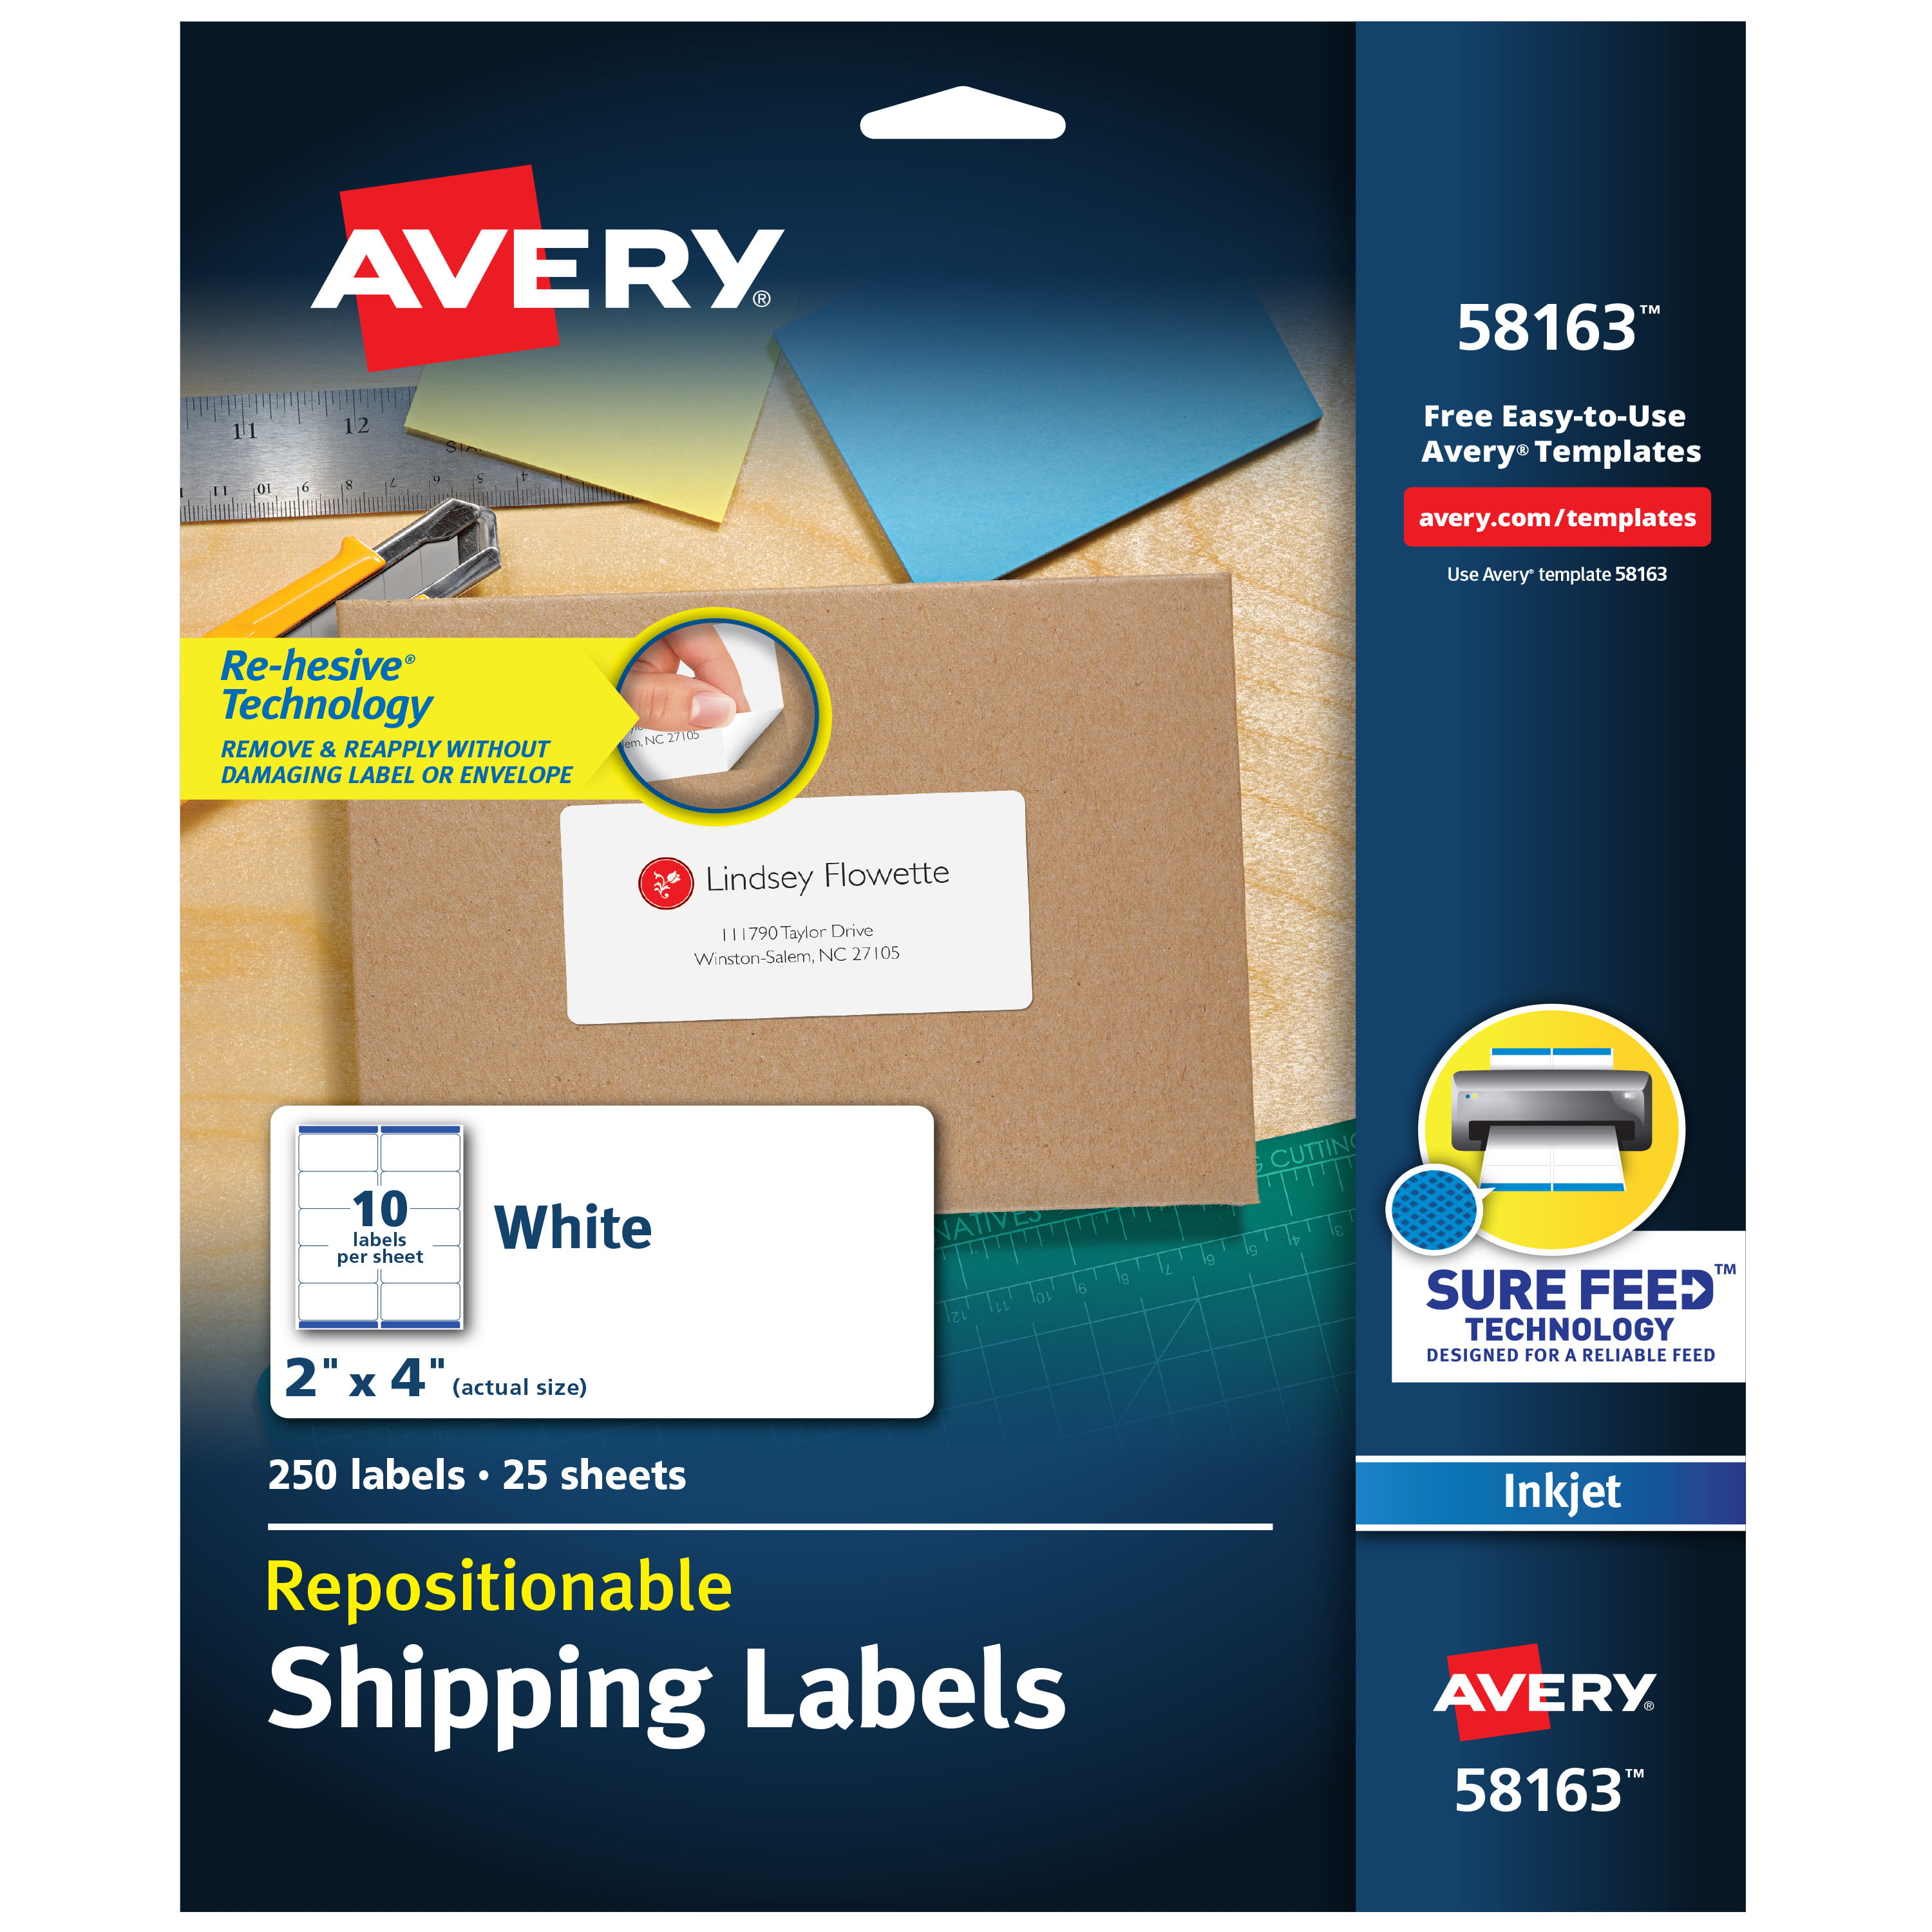 templates for avery labels 3381